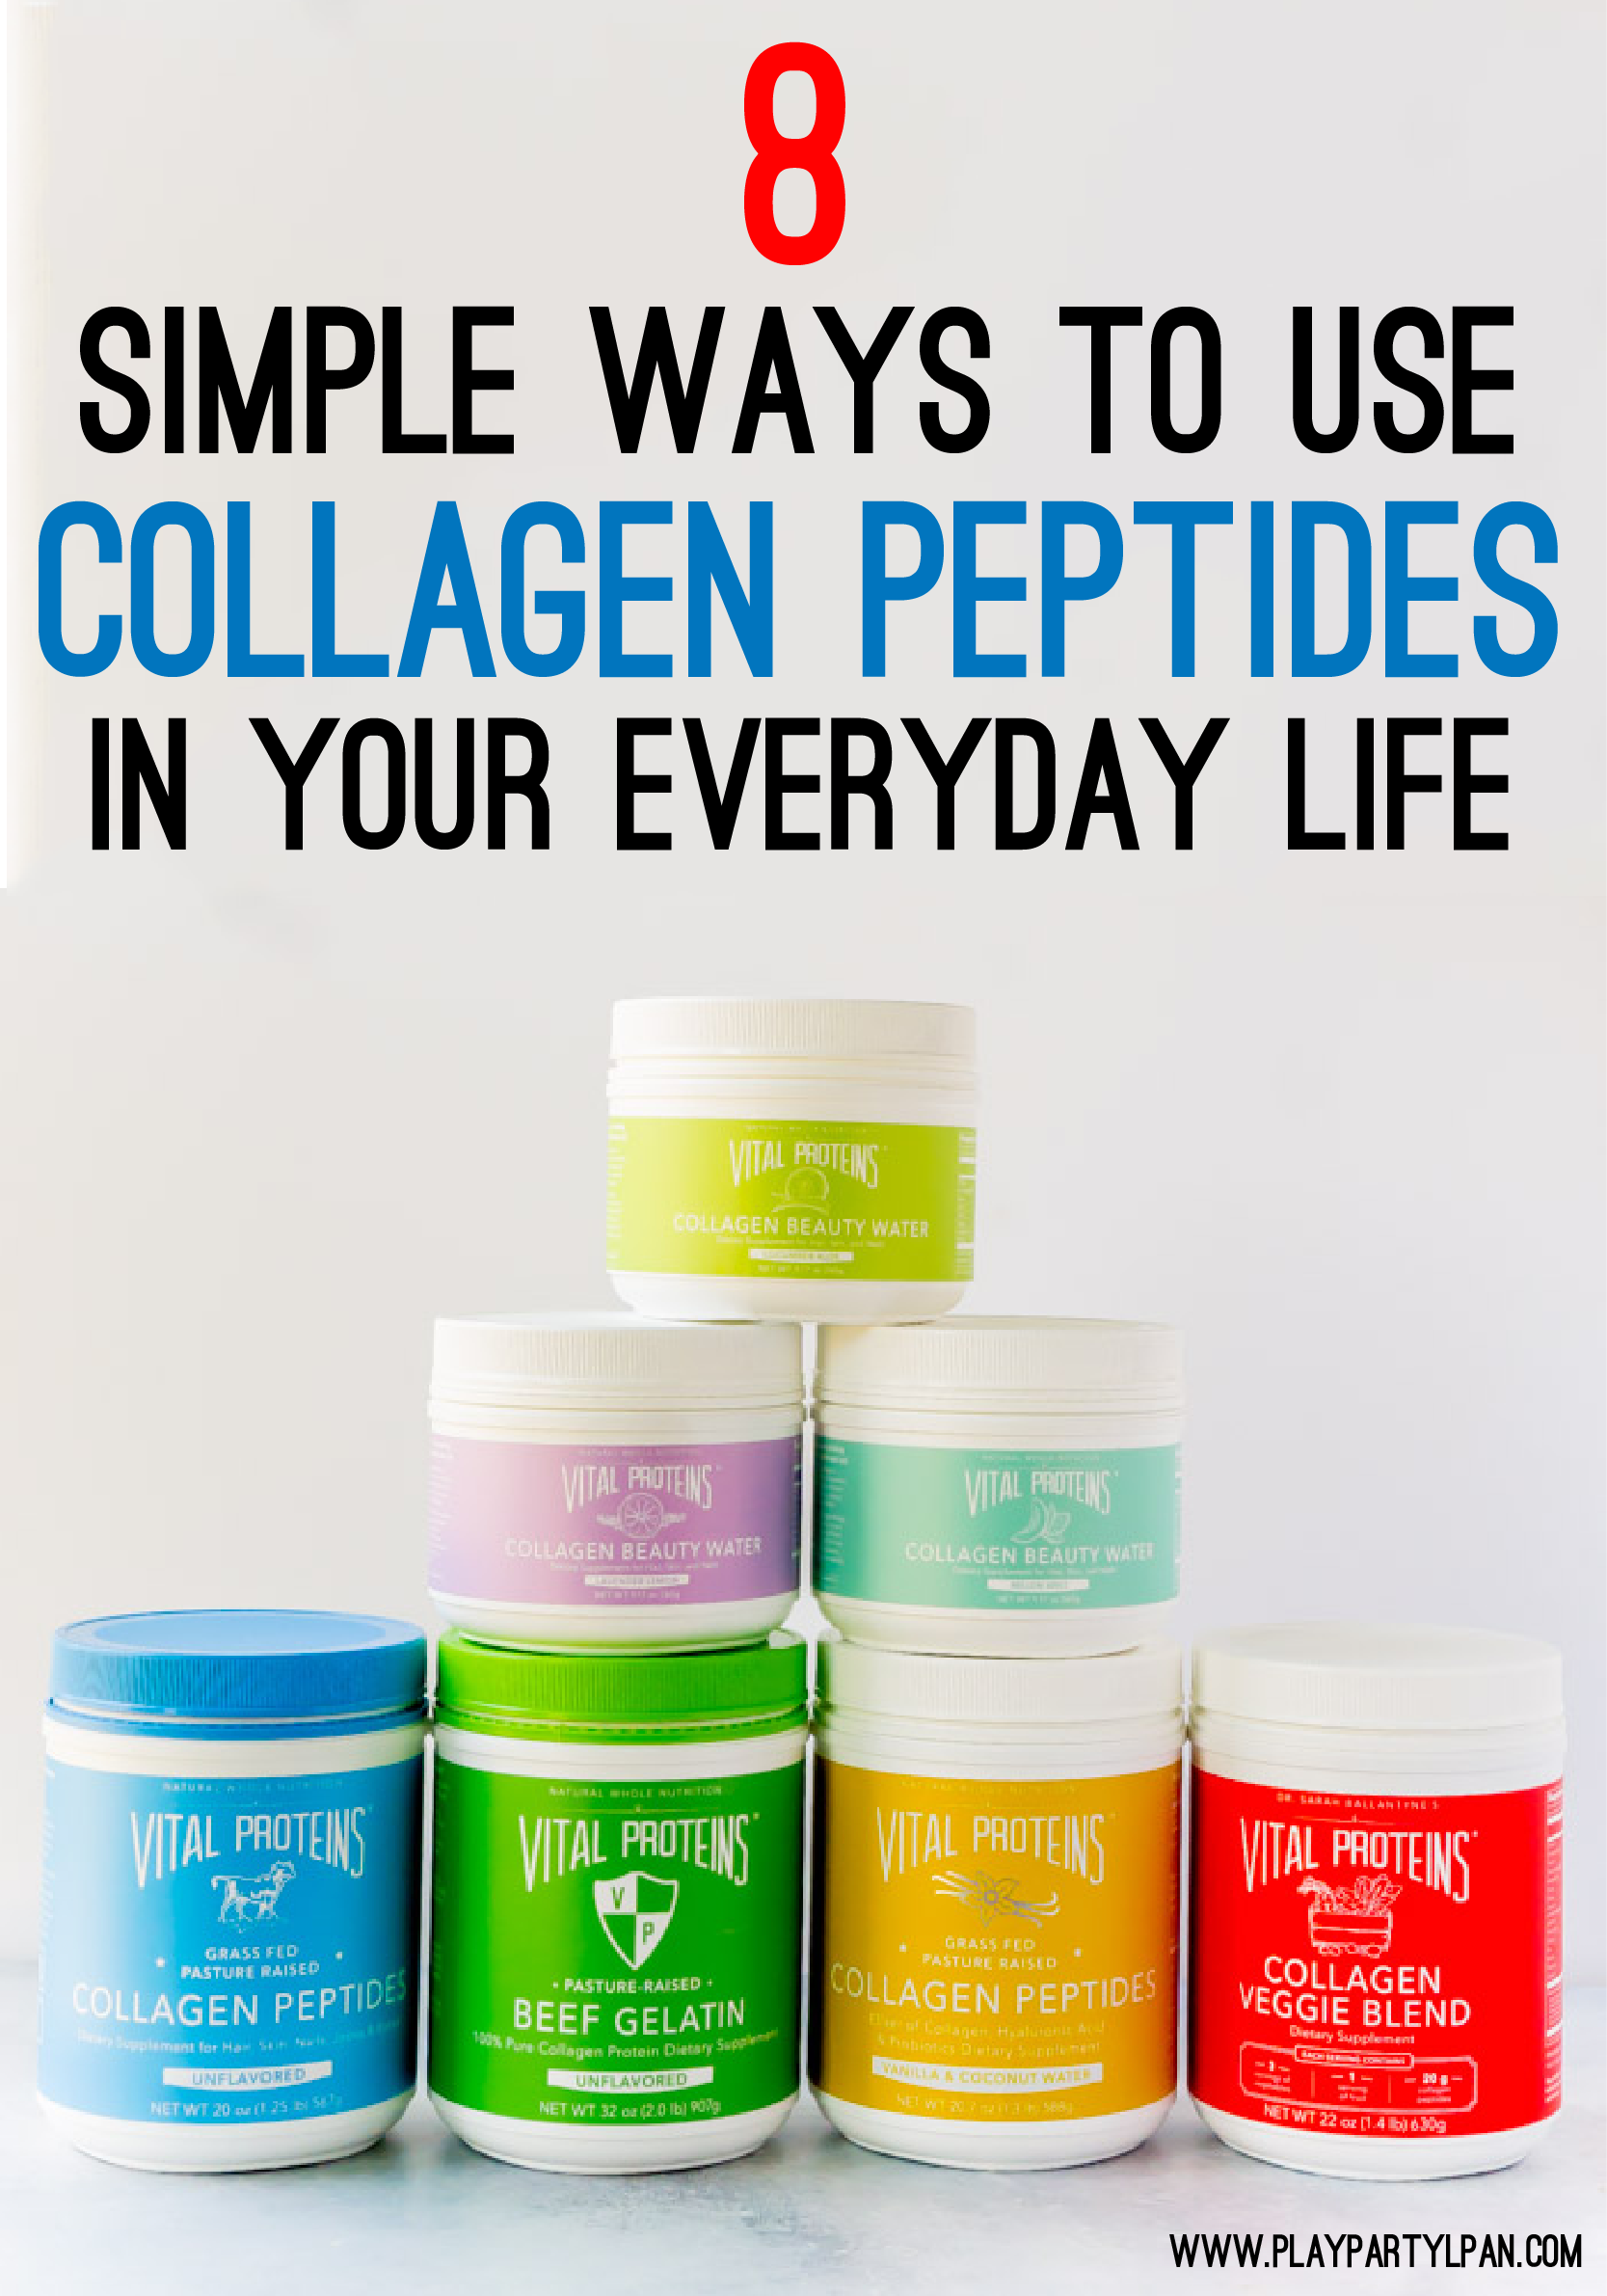 8 Simple Ways To Use Vital Proteins Collagen Peptides Play Party Plan,Budget Small Backyard Landscaping Ideas